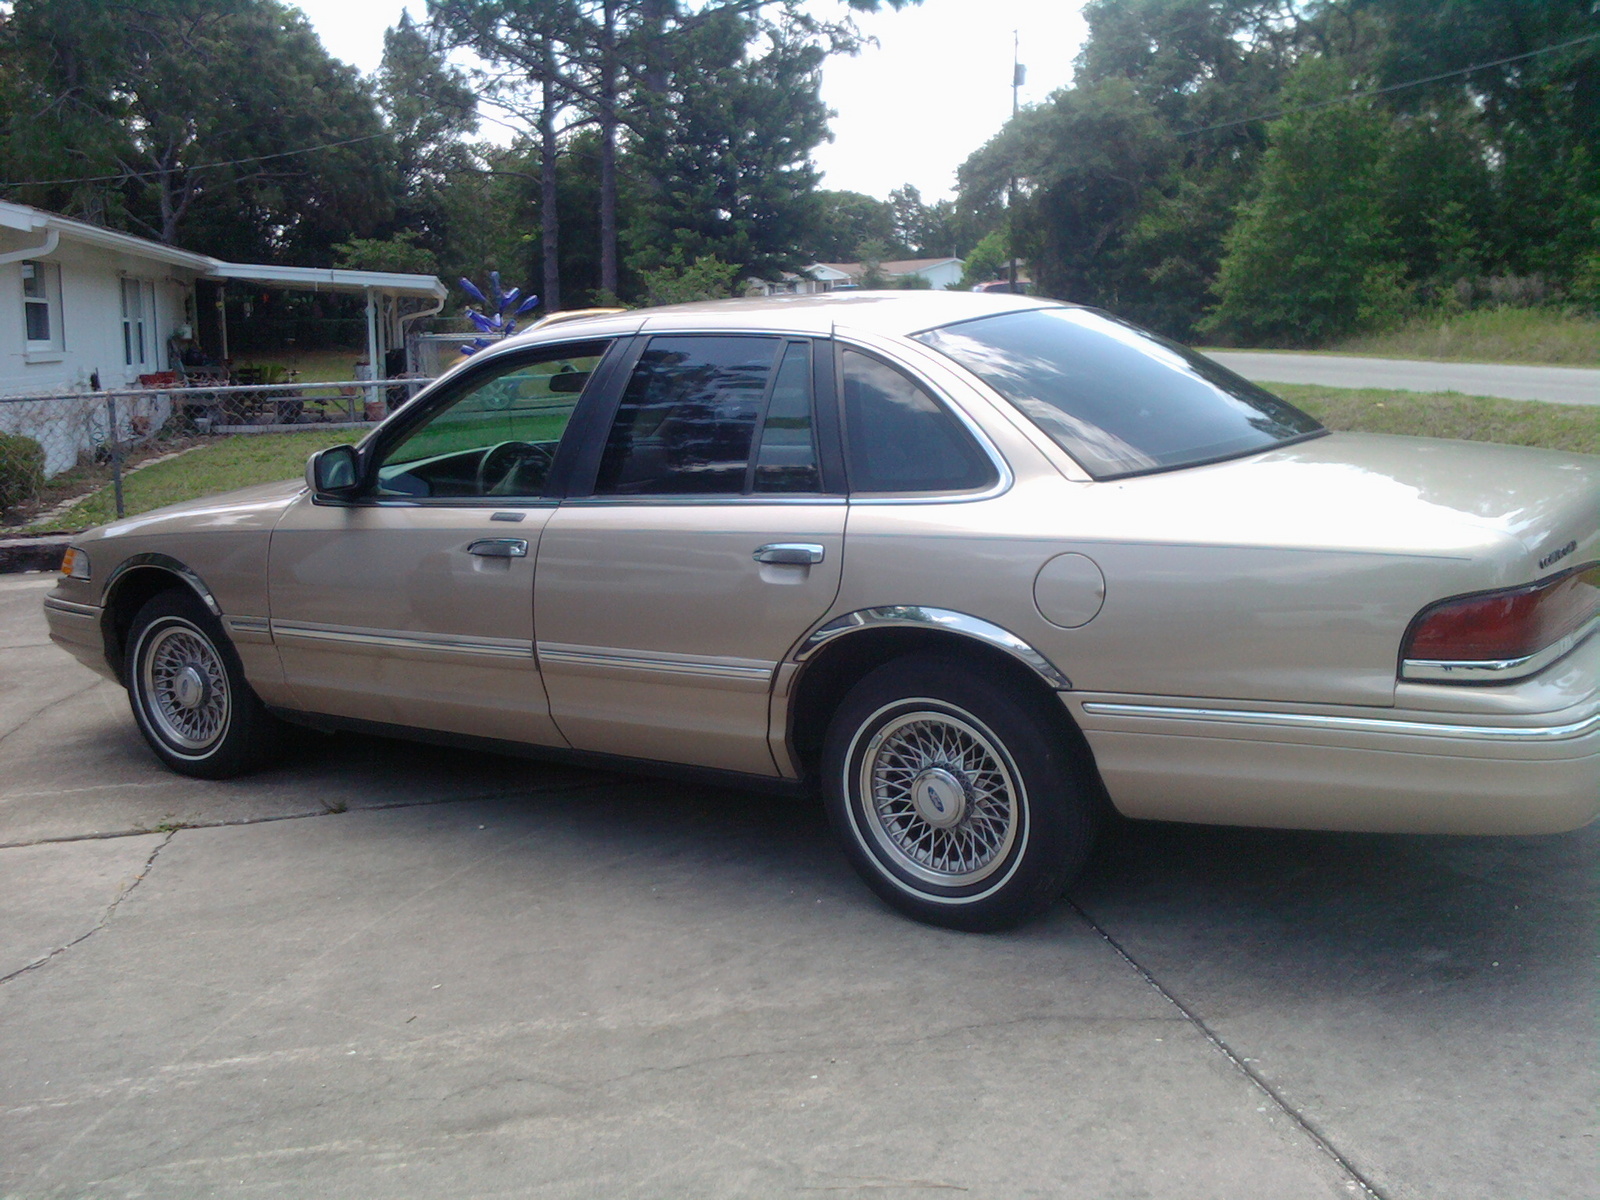 1997 Crown ford lx victoria #8